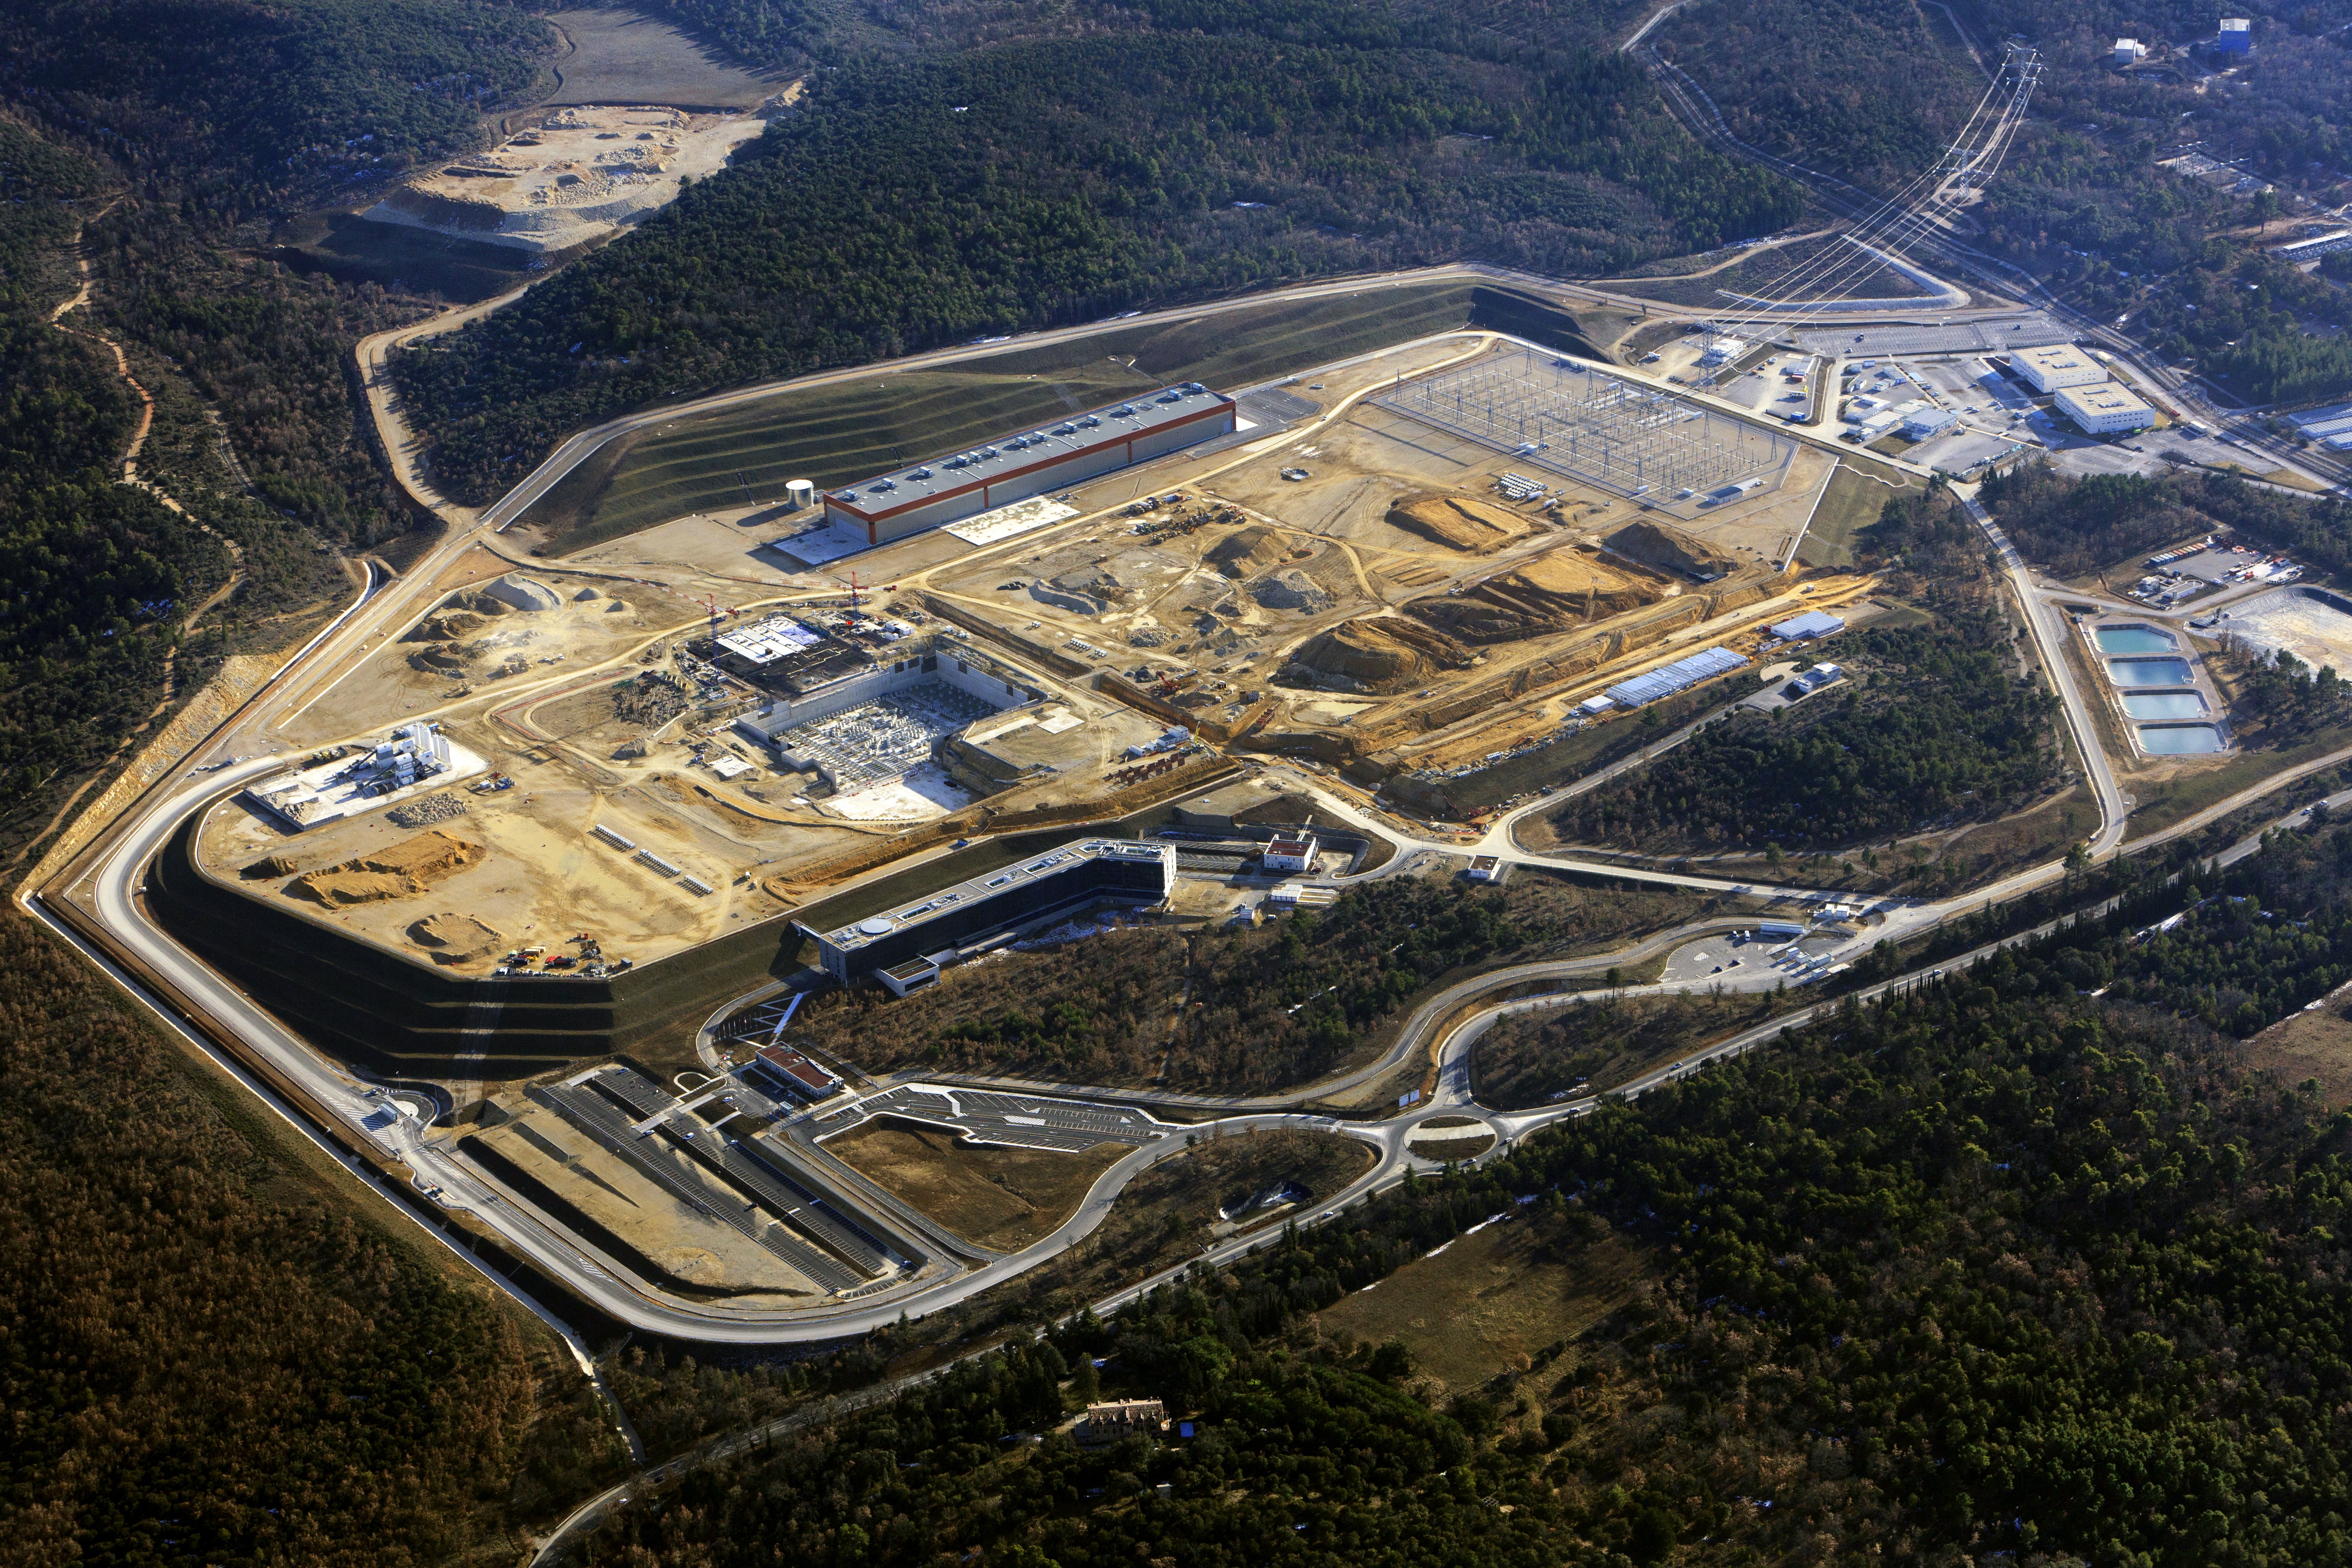 The international ITER fusion project under construction in the south of France. Over budget, behind schedule, what else is new? Photo taken February 2013.